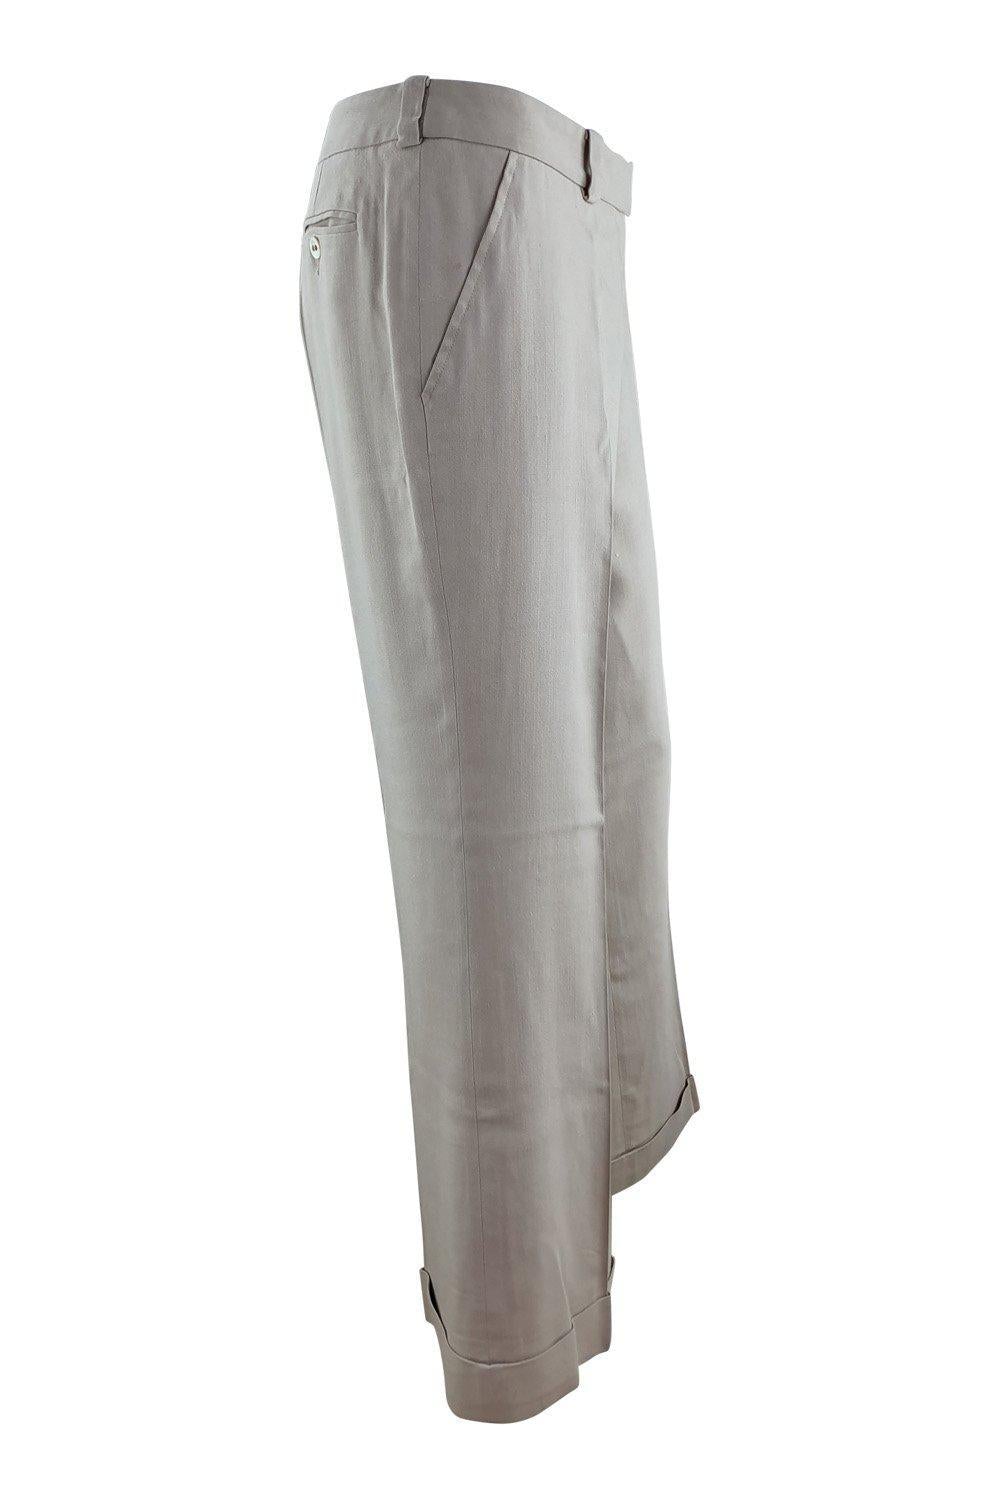 CHRISTIAN DIOR Cream Bootcut Women's Silk Crease Front Trousers (UK 14)-Christian Dior-The Freperie